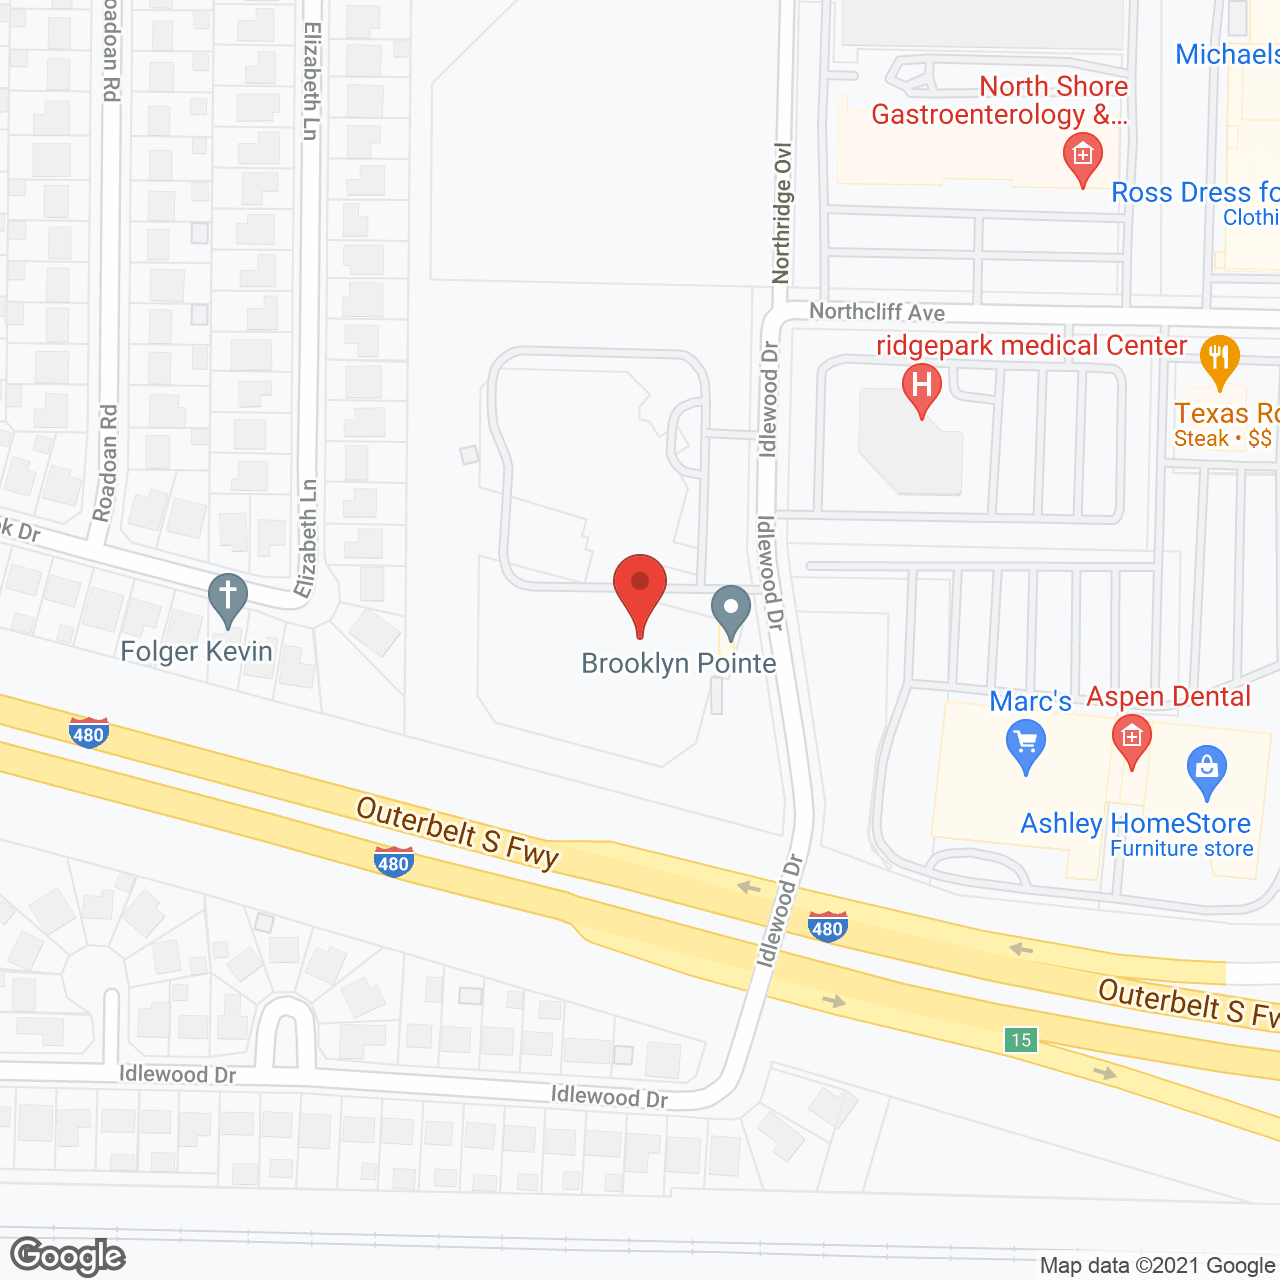 Brooklyn Pointe Assisted Living and Memory Care in google map